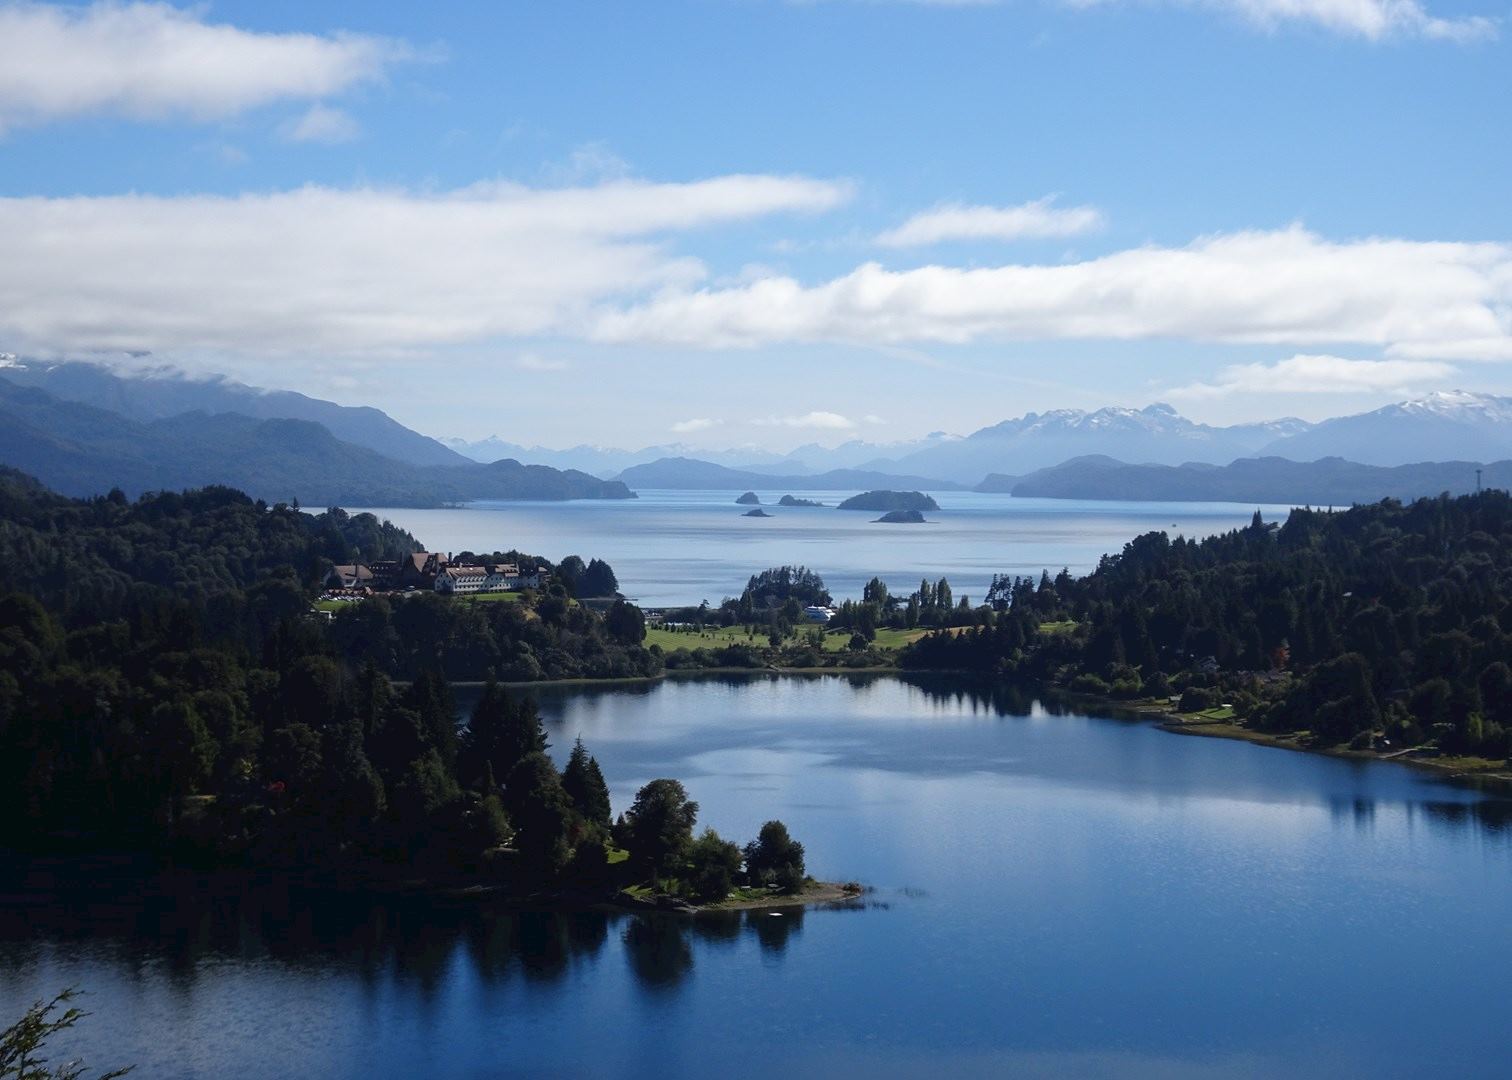 Visit Bariloche on a trip to Argentina | Audley Travel